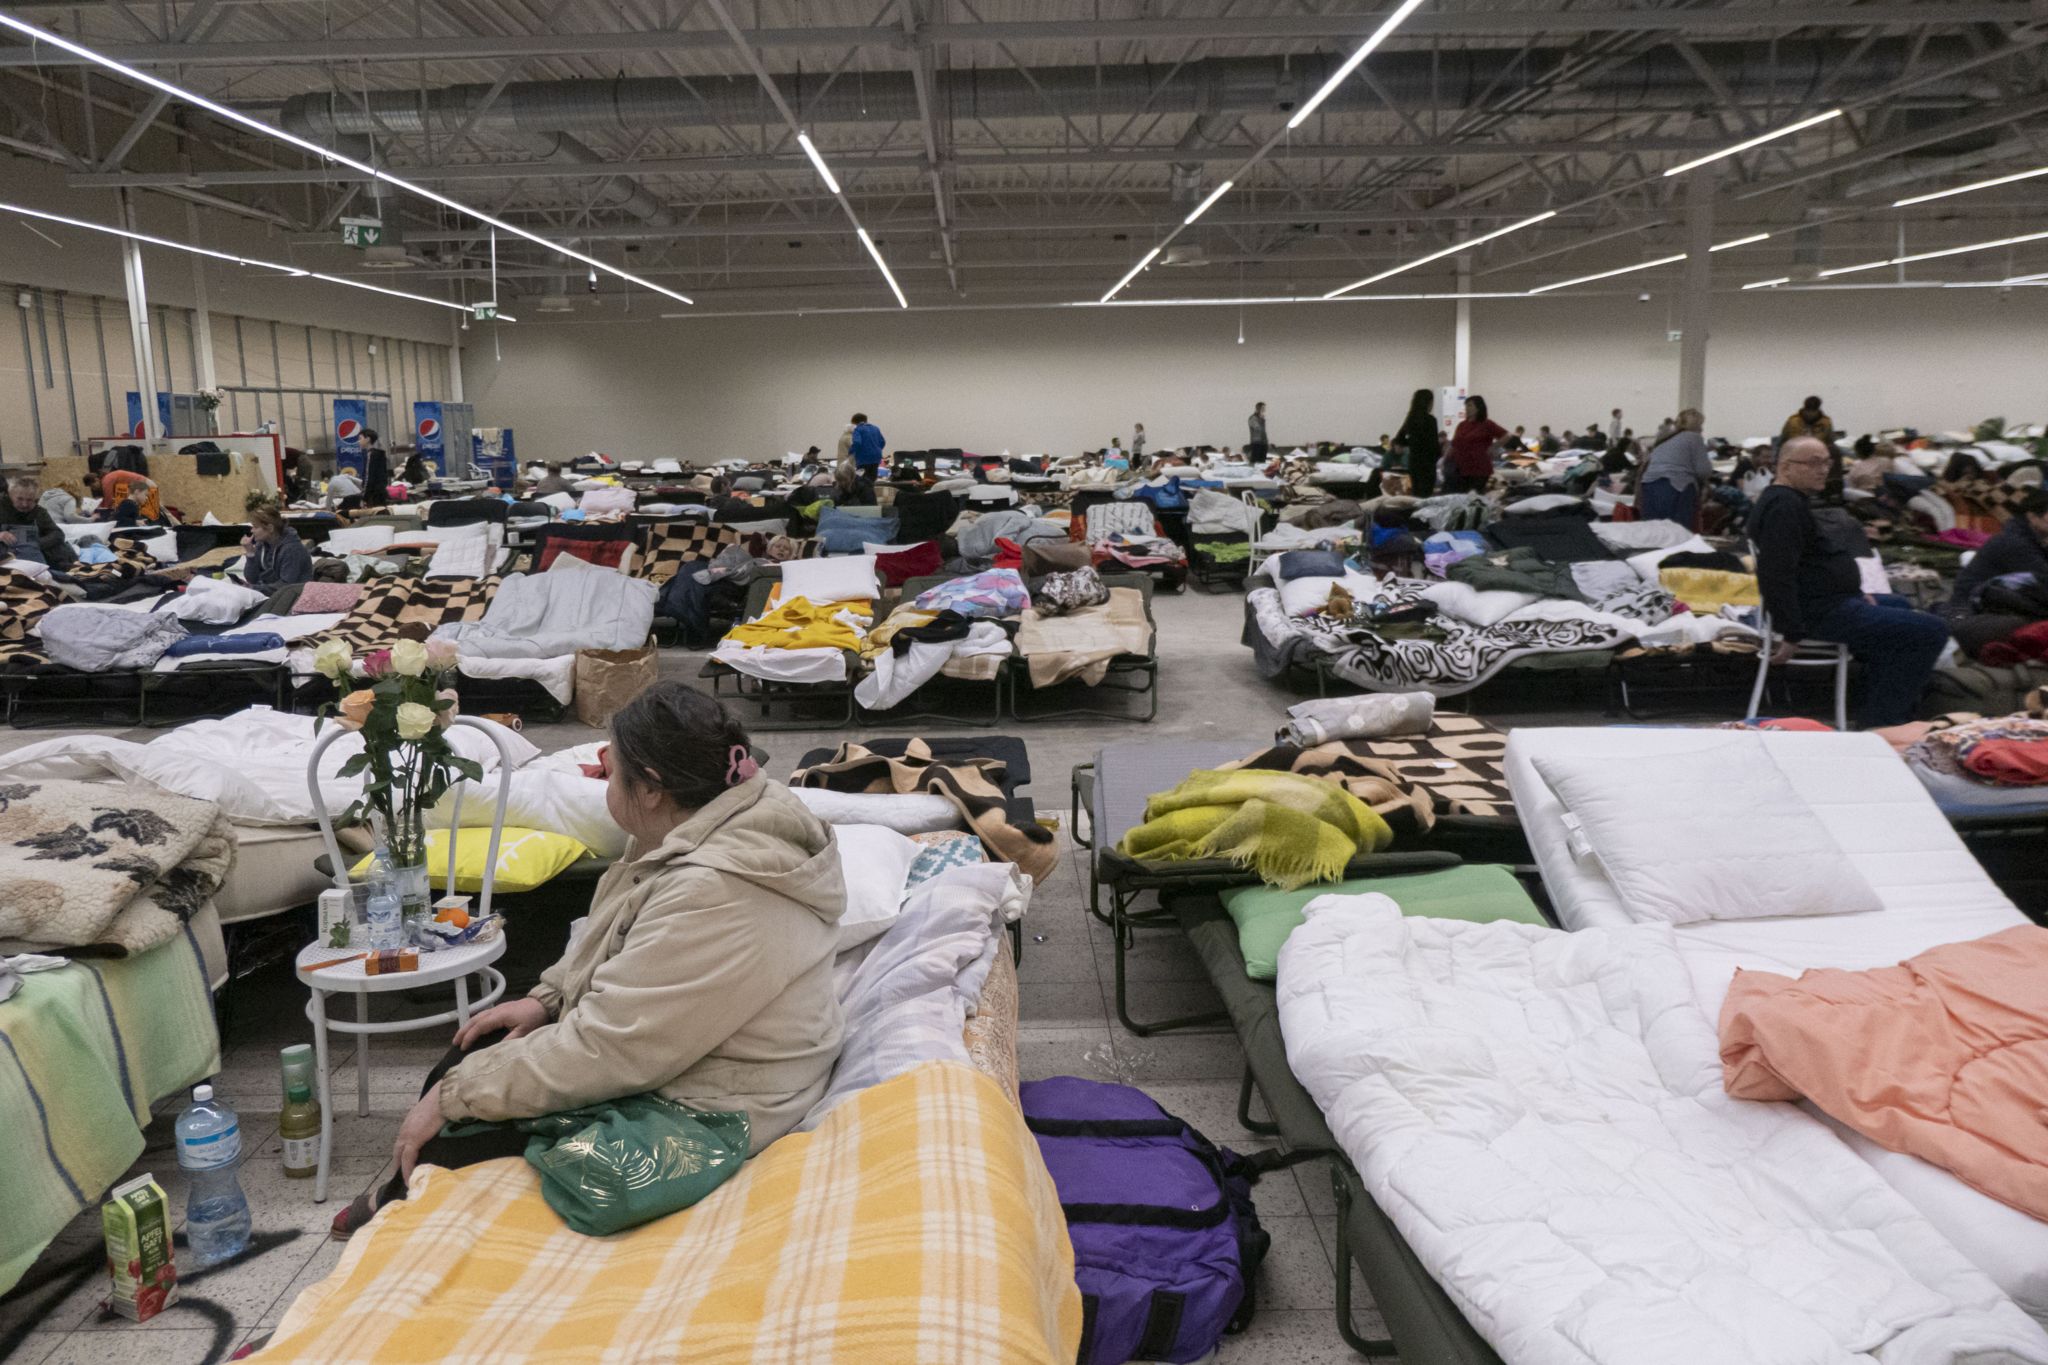 Temporary sleeping area with camp beds and mattresses for people at the Temporary Humanitarian Aid Centre in Przemysl Poland